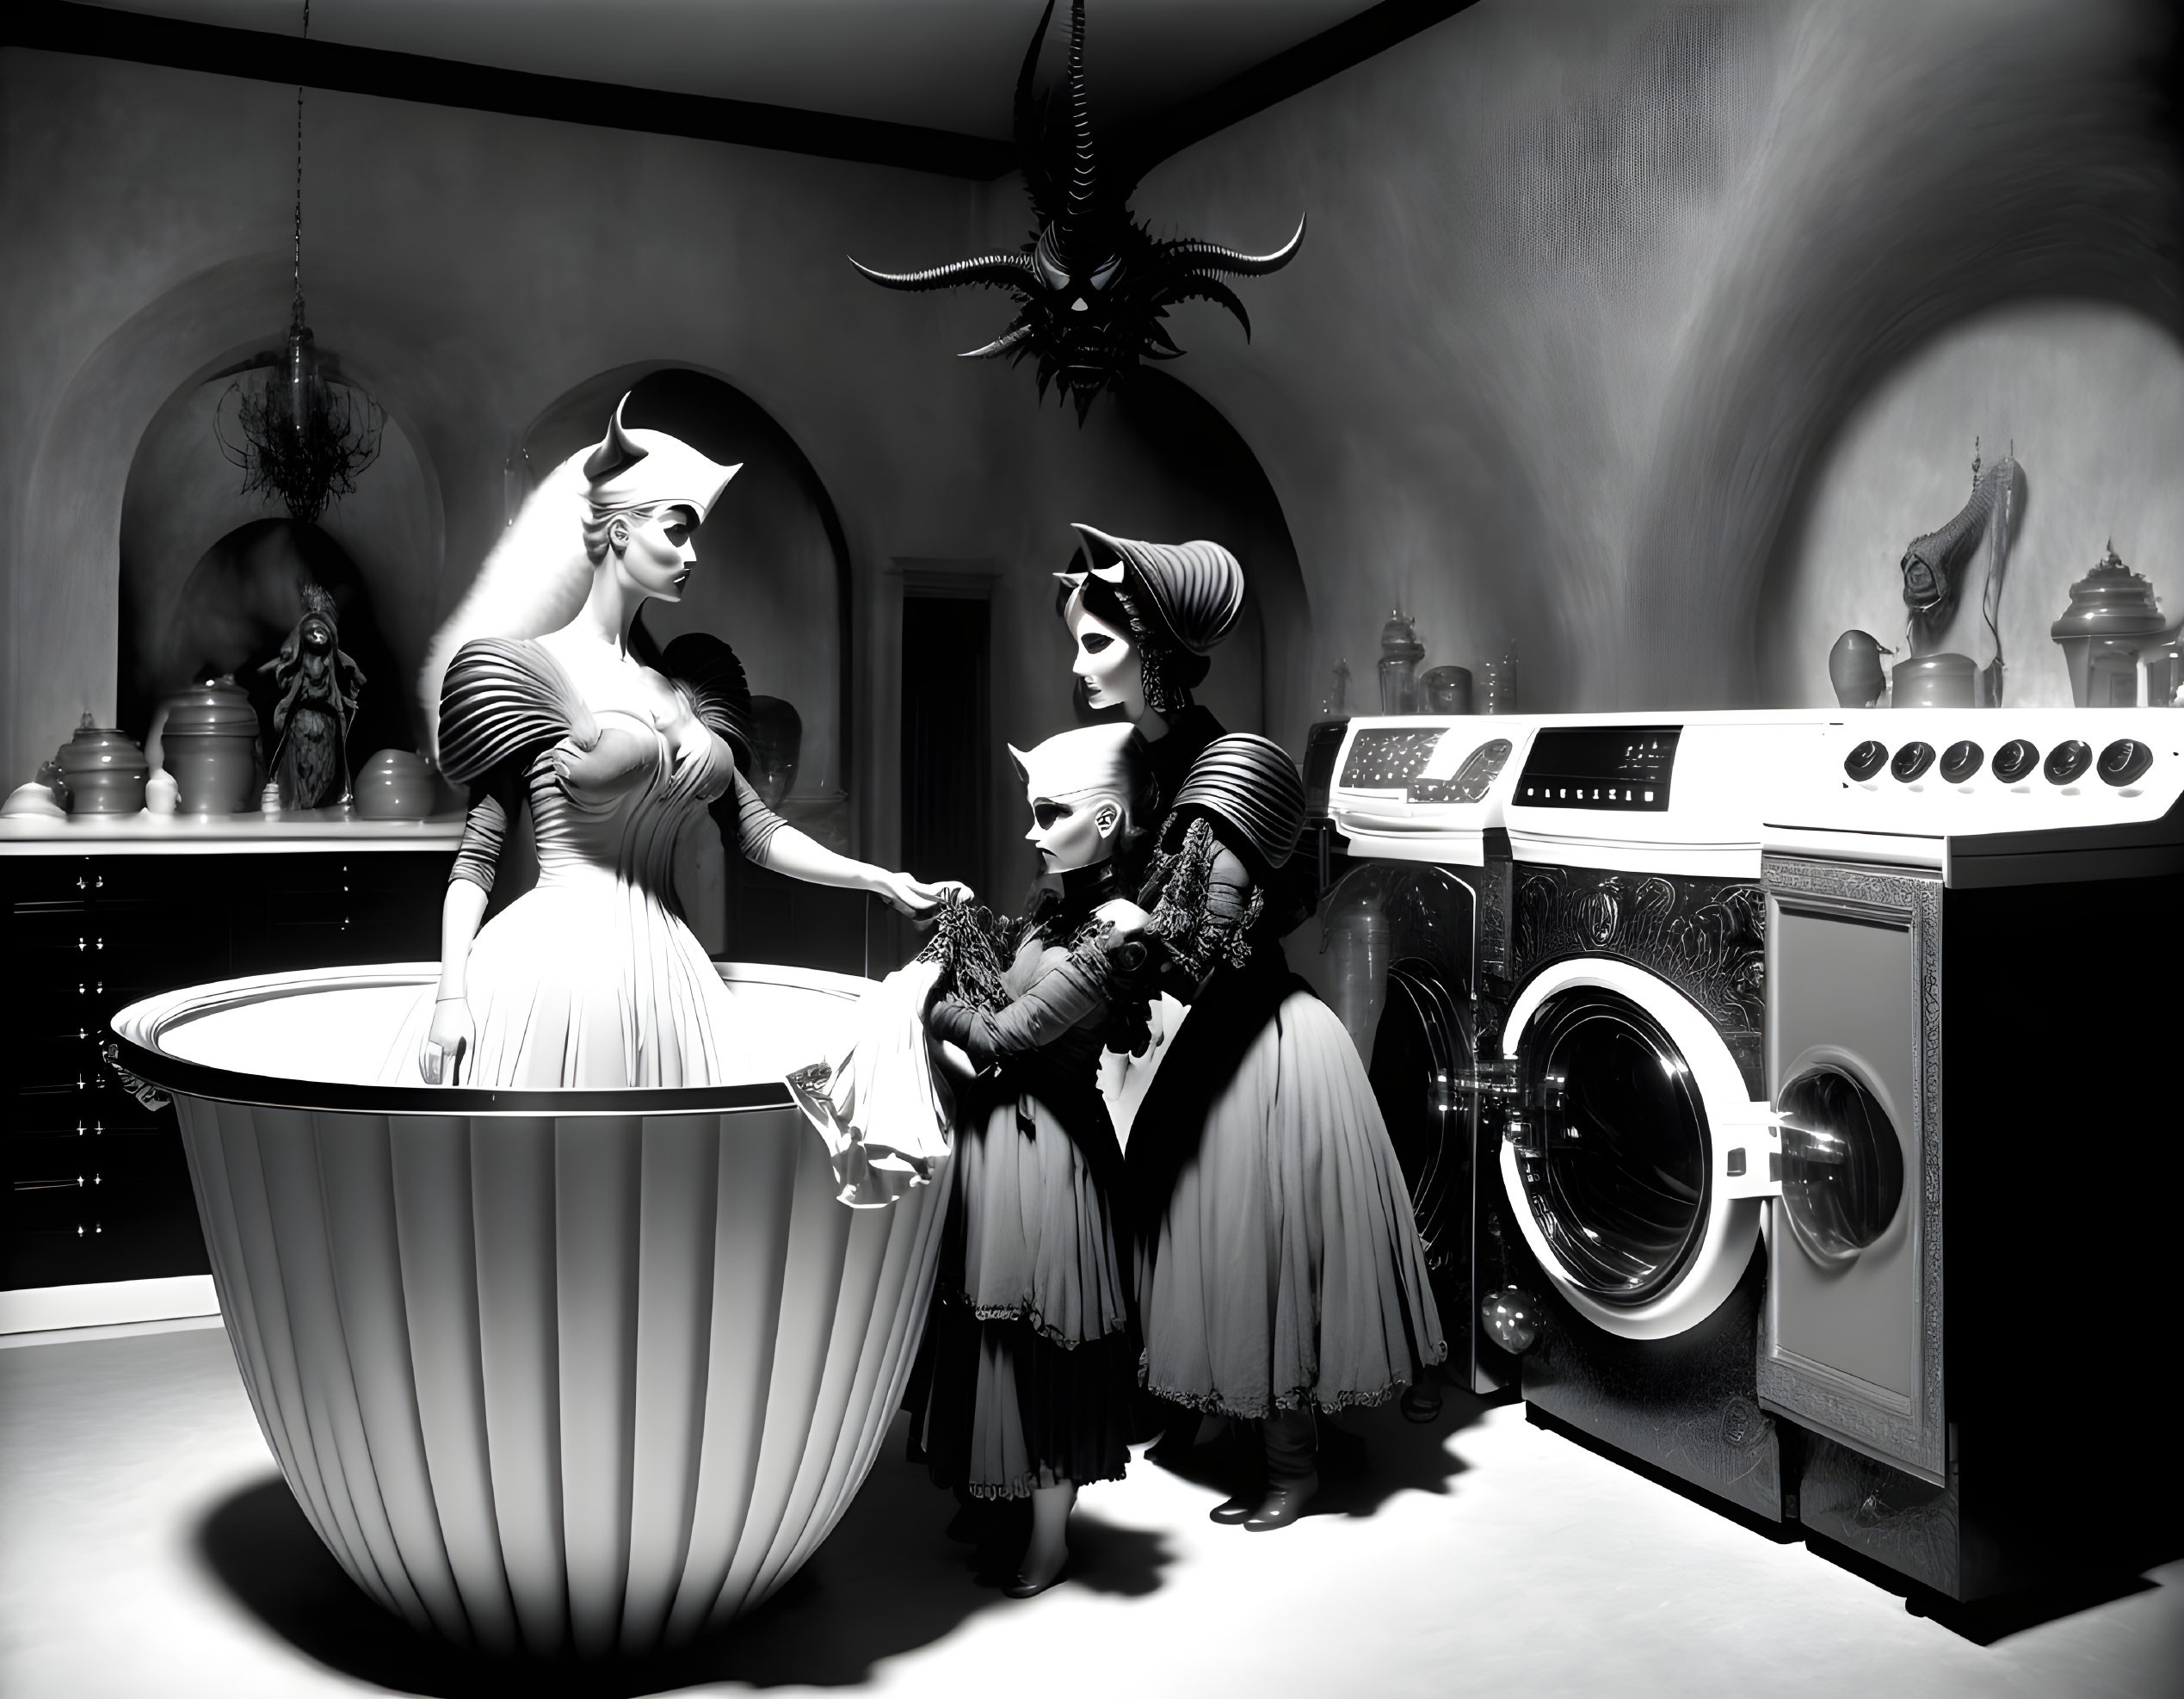 Demon assisting House Wife with the Laundry 2